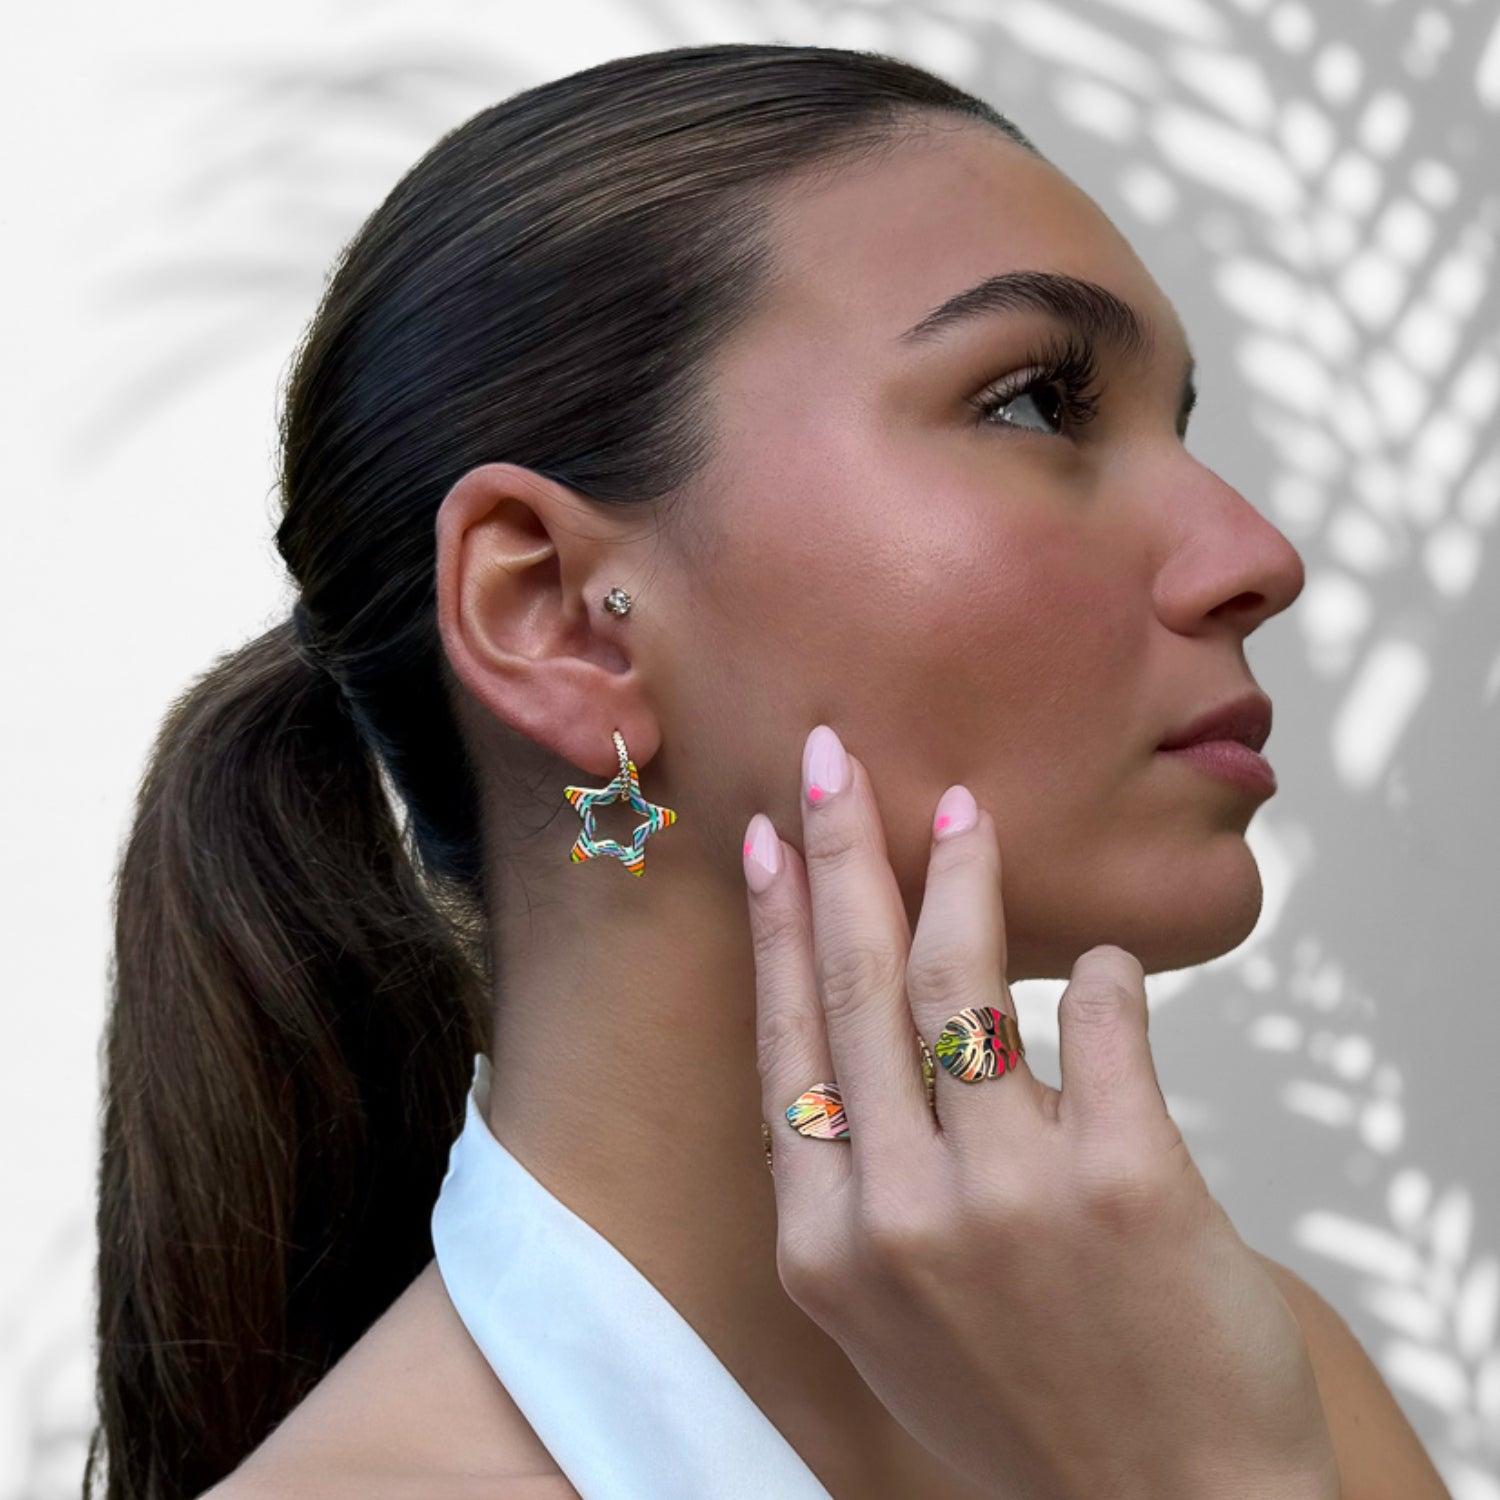 Reflect your personality: Model showcasing the vibrant Pastel Colors Earrings